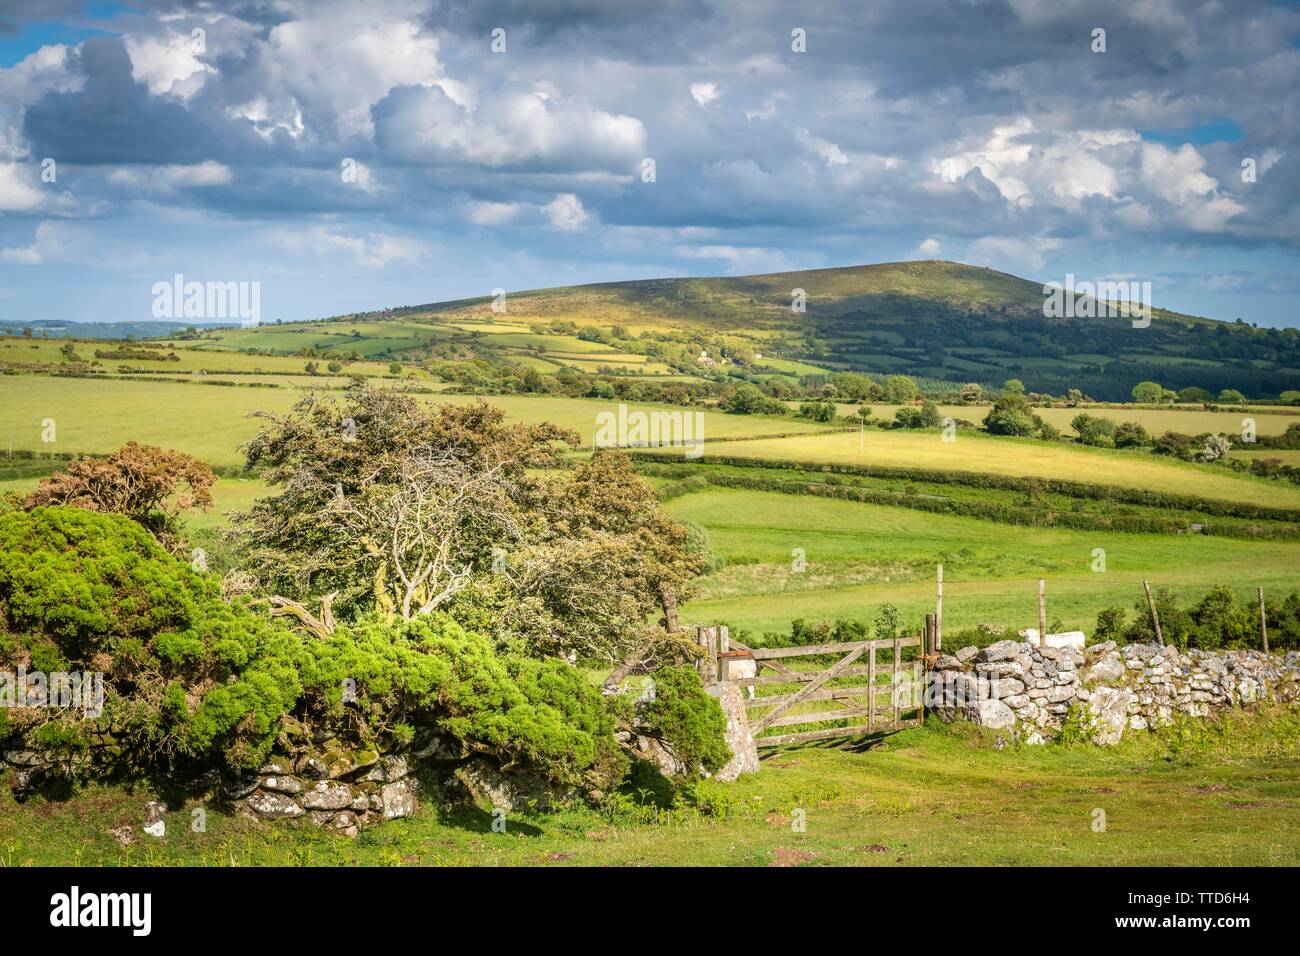 One of the many boundaries that cross the landscape of Dartmoor National Park in Devon, England. Stock Photo